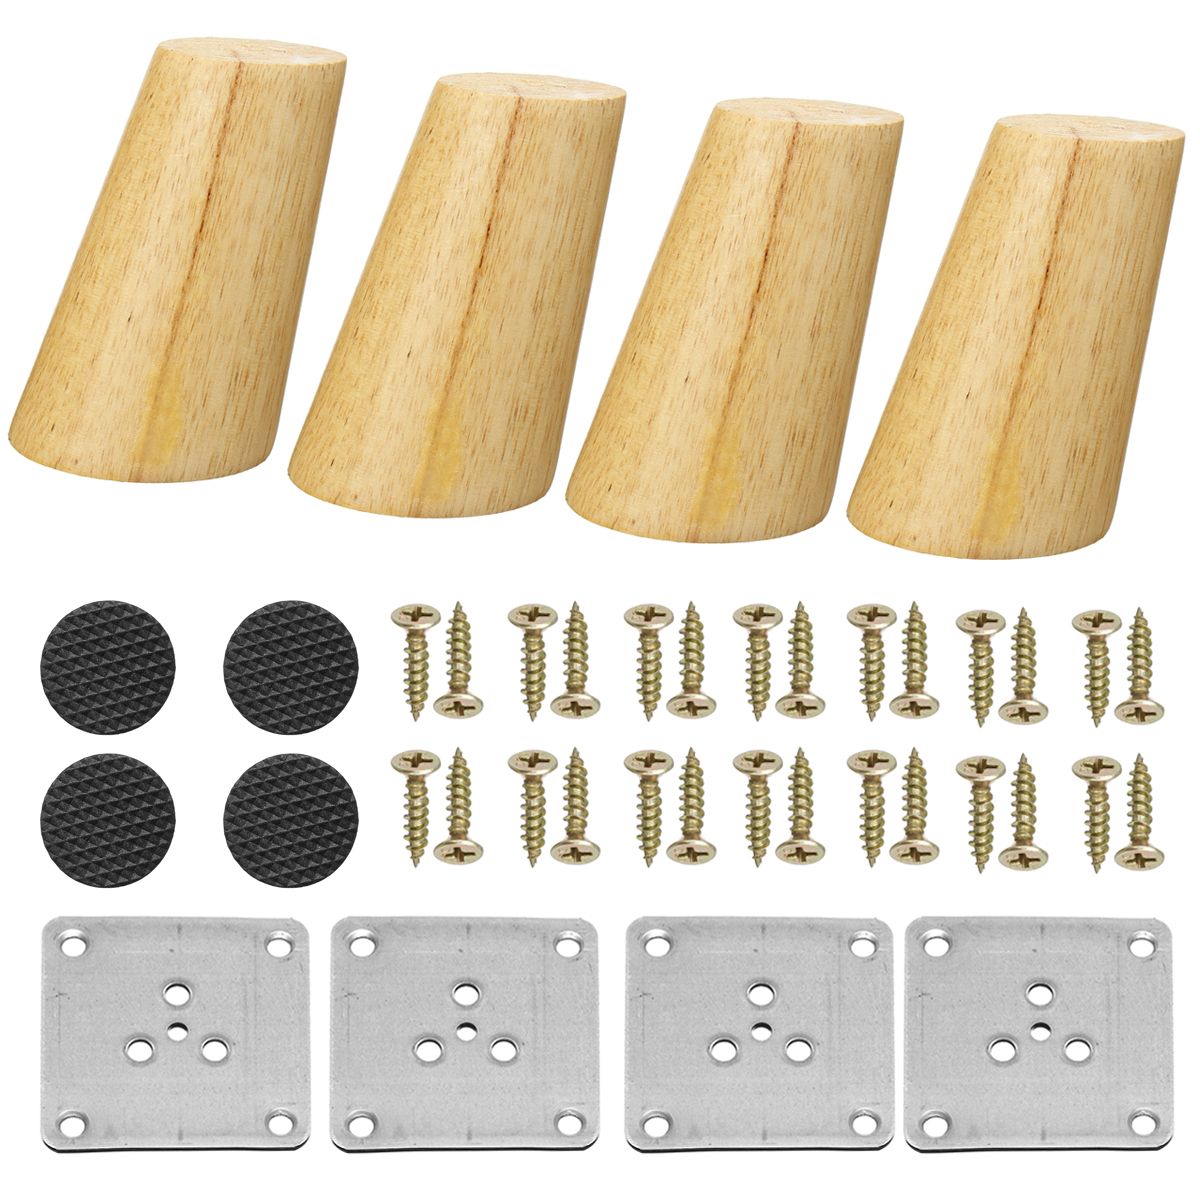 4PcsSet-Solid-Wooden-Cone-Angled-Furniture-Legs-Kit-Sofa-Table-Chair-Stool-Part-Leg-Support-1631830-2